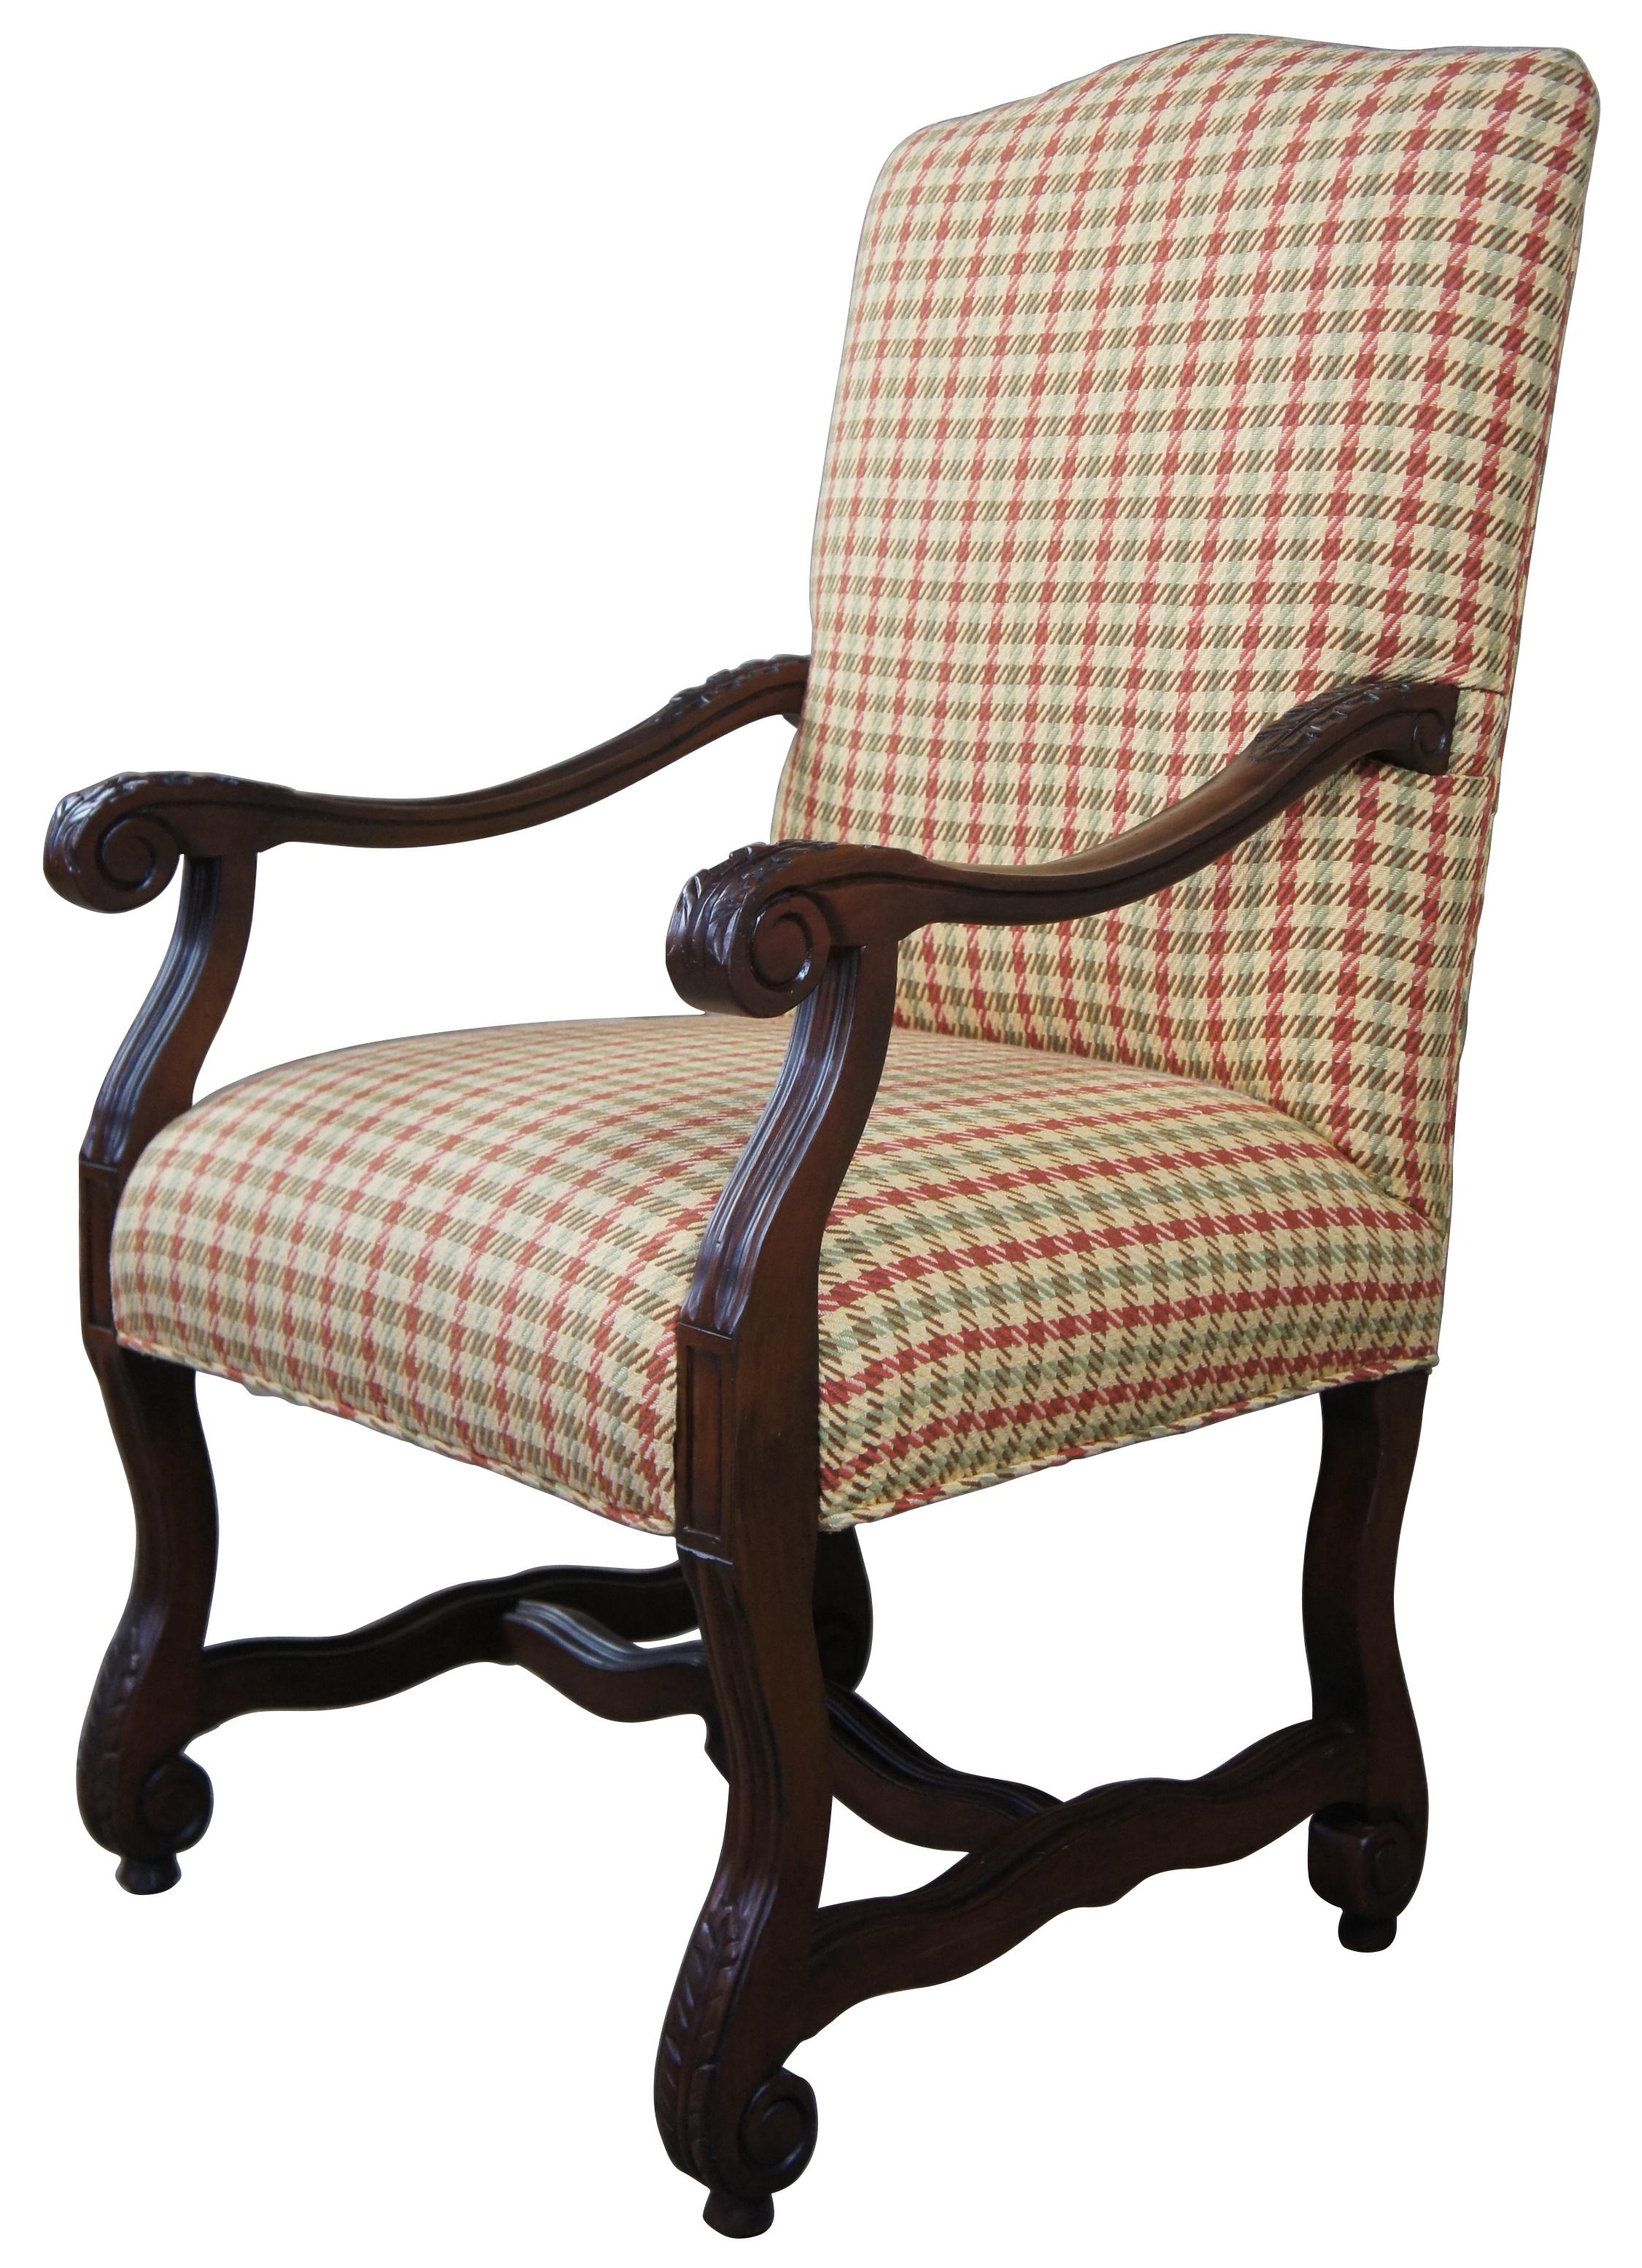 Old world Tuscan style armchair with scrolled arms and legs. Features acanthus leaf carvings and a serpentine trestle base. Great for use in the library or living area. 
 